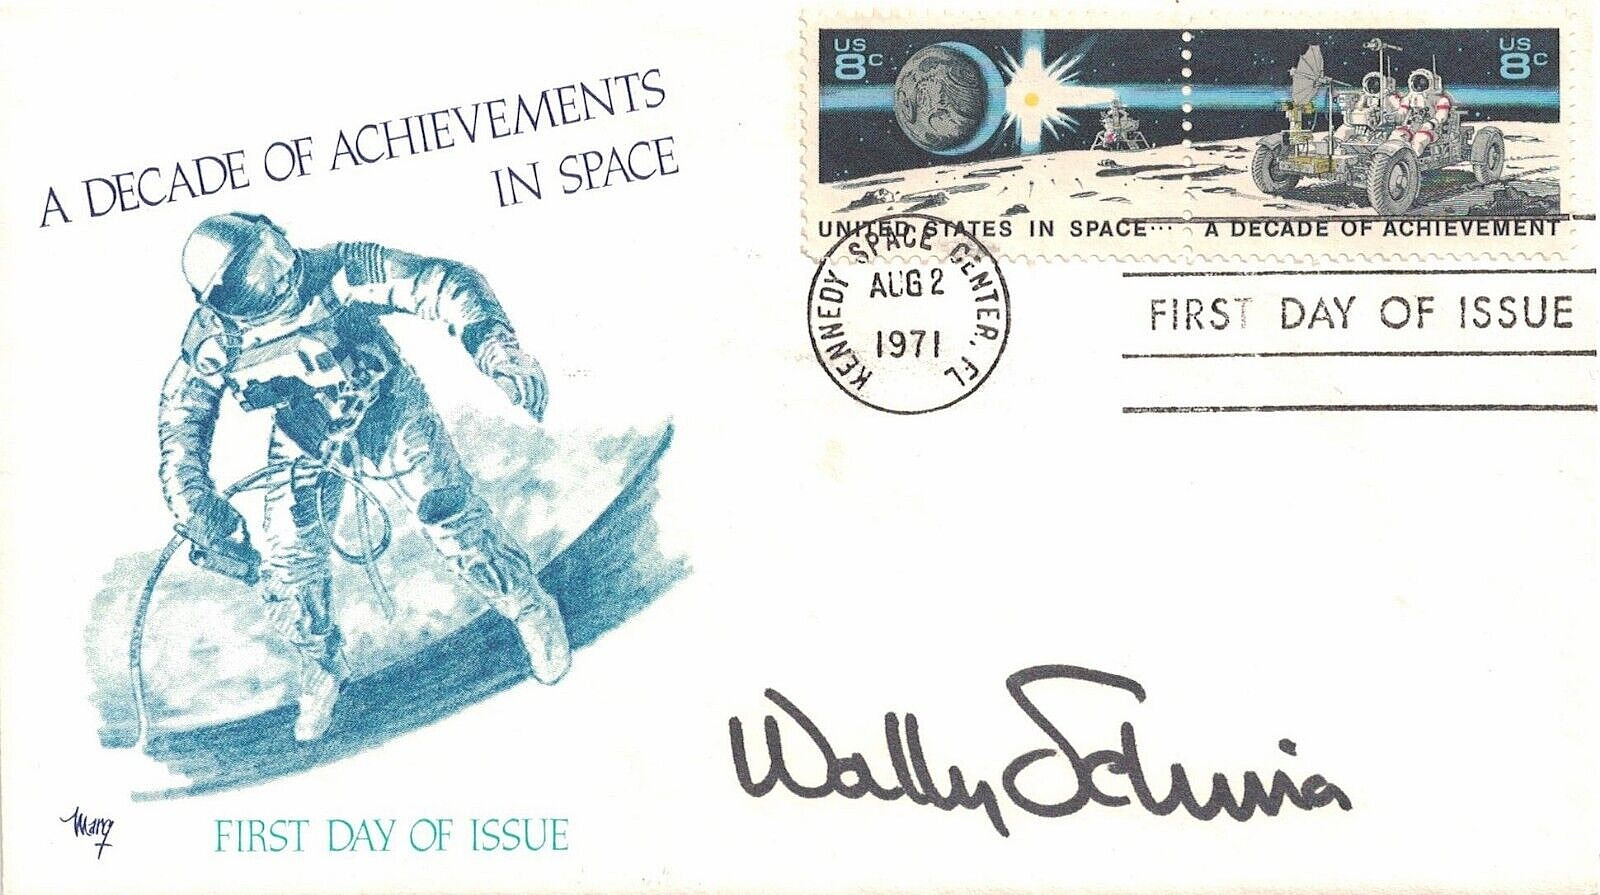 WALLY SCHIRRA SIGNED DECADE OF ACHIEVEMENTS IN SPACE FIRST DAY COVER